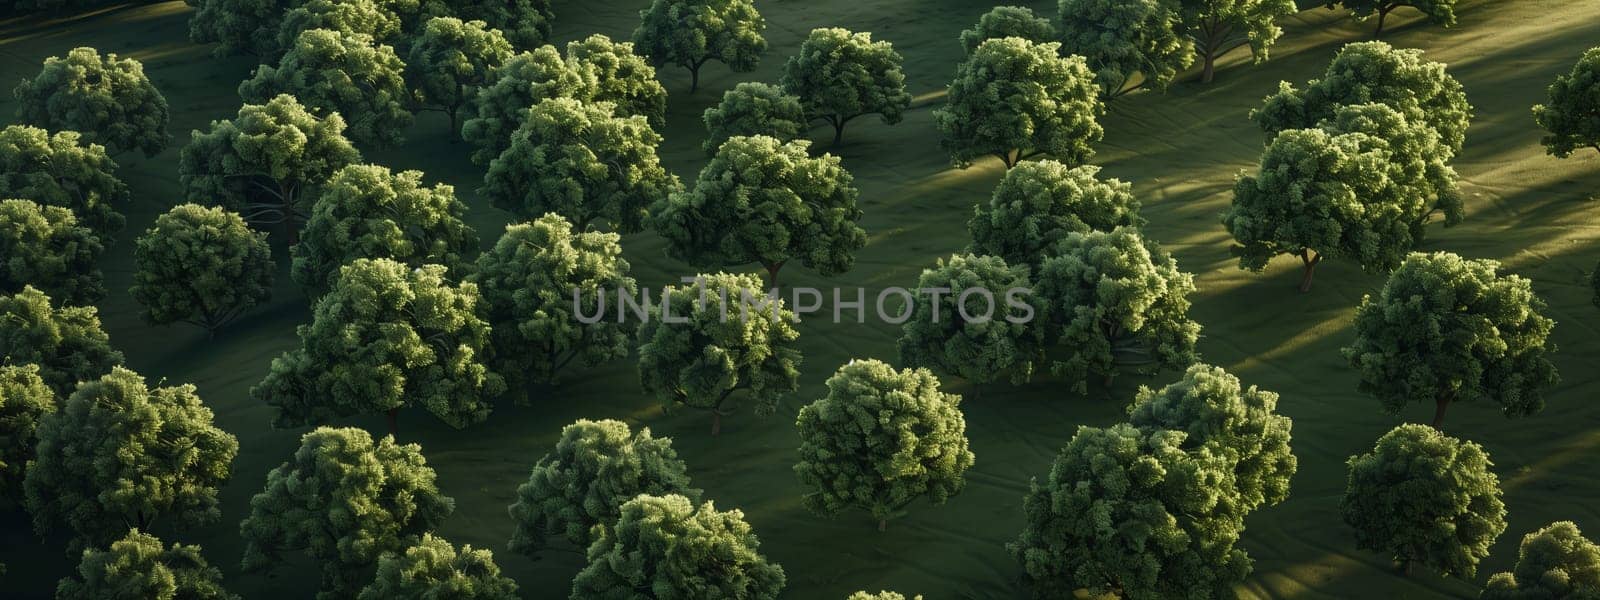 Birds eye view of dense forest with countless trees and lush greenery by richwolf